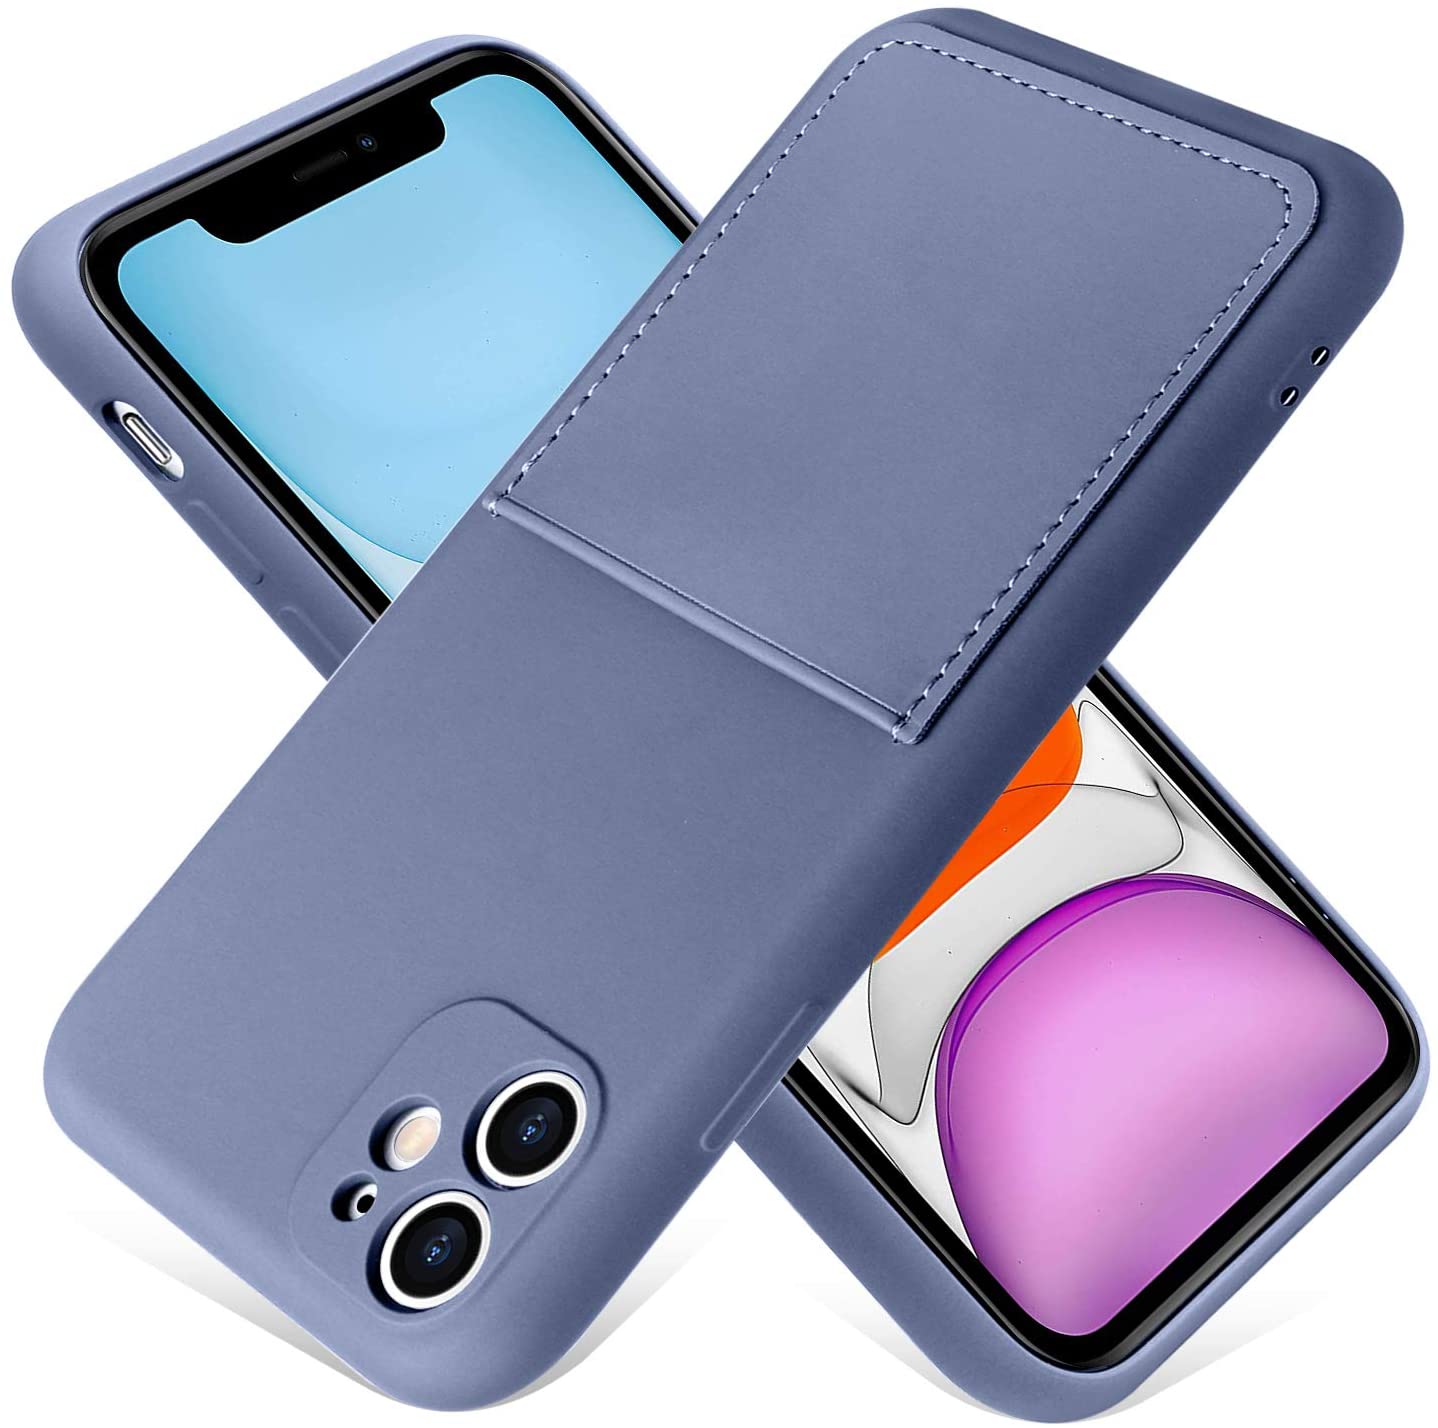 Photo 1 of MZELQ iPhone 11 Pro Max Case 2019 (6.5 Inch) Liquid Silicone Card Slot Soft Cover Shockproof Anti Scratch Microfiber Lining Full Body Protection Shell-Lavender Grey